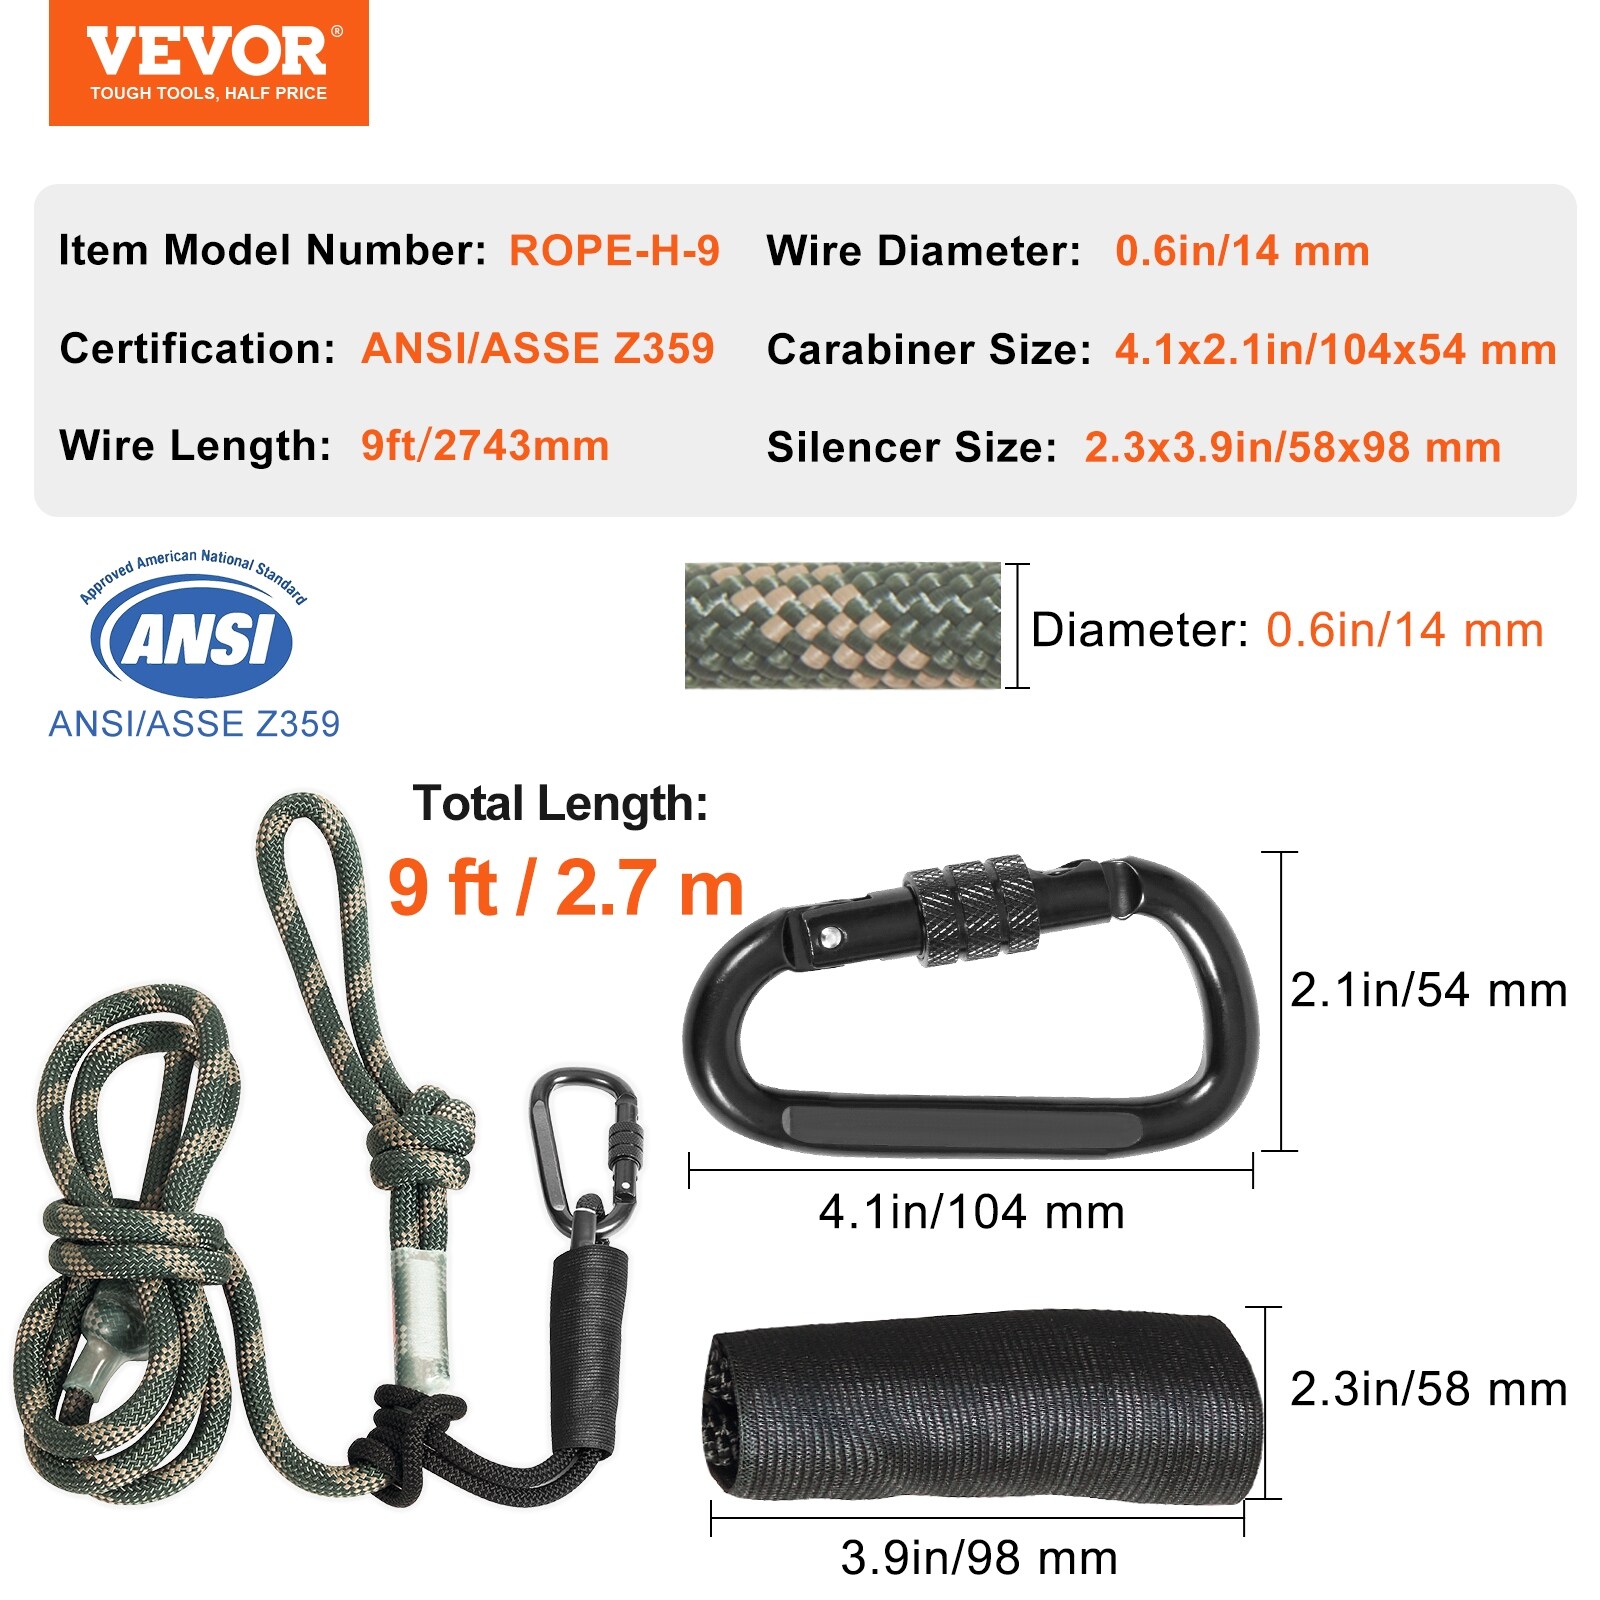 VEVOR Tree Stand Rope 9ft and 30ft 30KN Lifeline 0.6in Hunting Safety 2 Carabiners - Grey